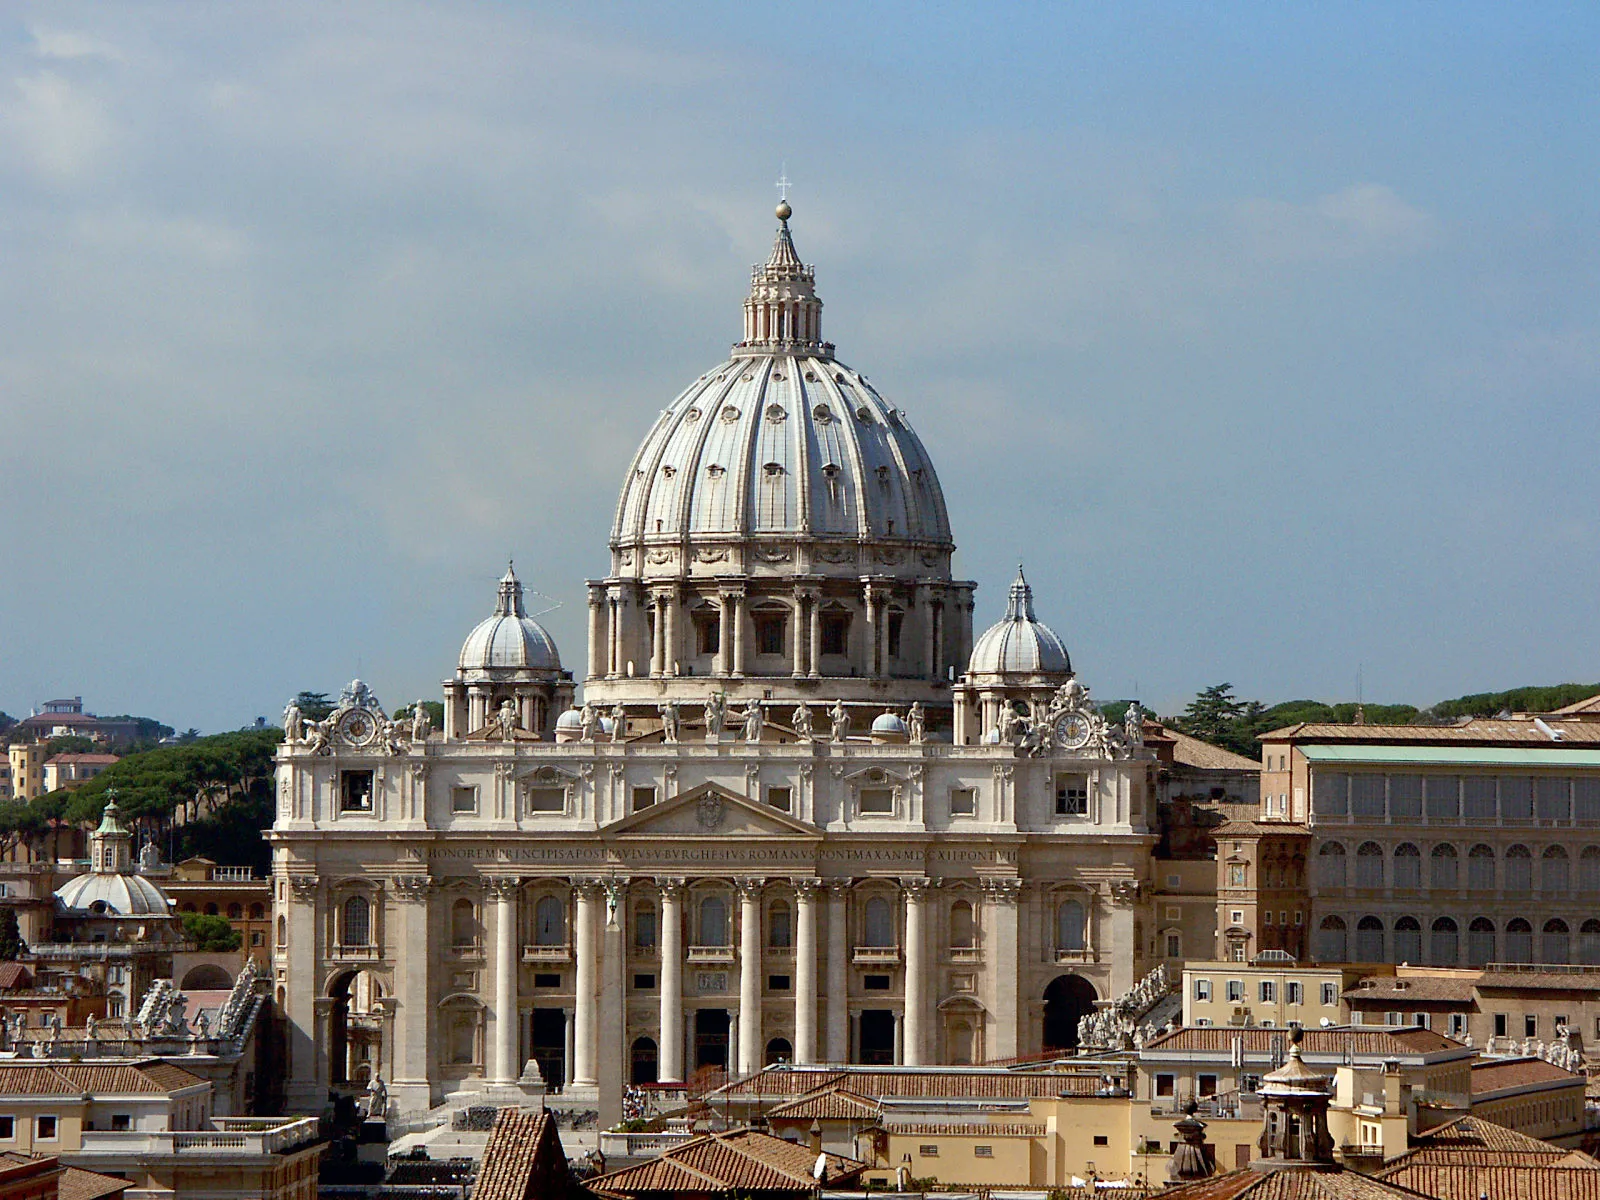 Photo showing: St. Peter's Basilica in Rome seen from the roof of Castel Sant'Angelo.